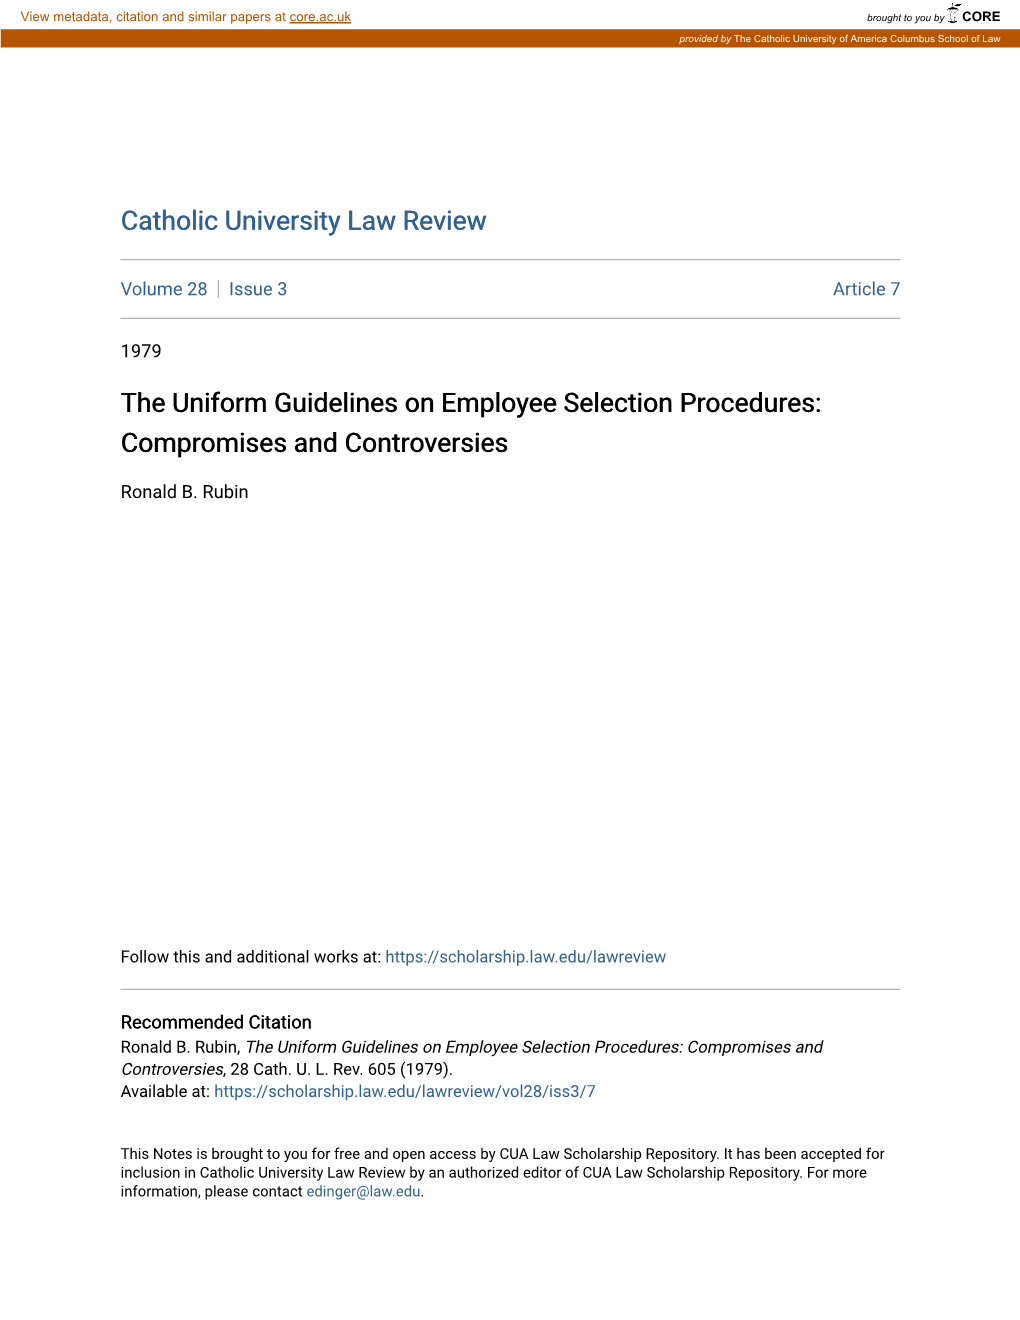 The Uniform Guidelines on Employee Selection Procedures: Compromises and Controversies